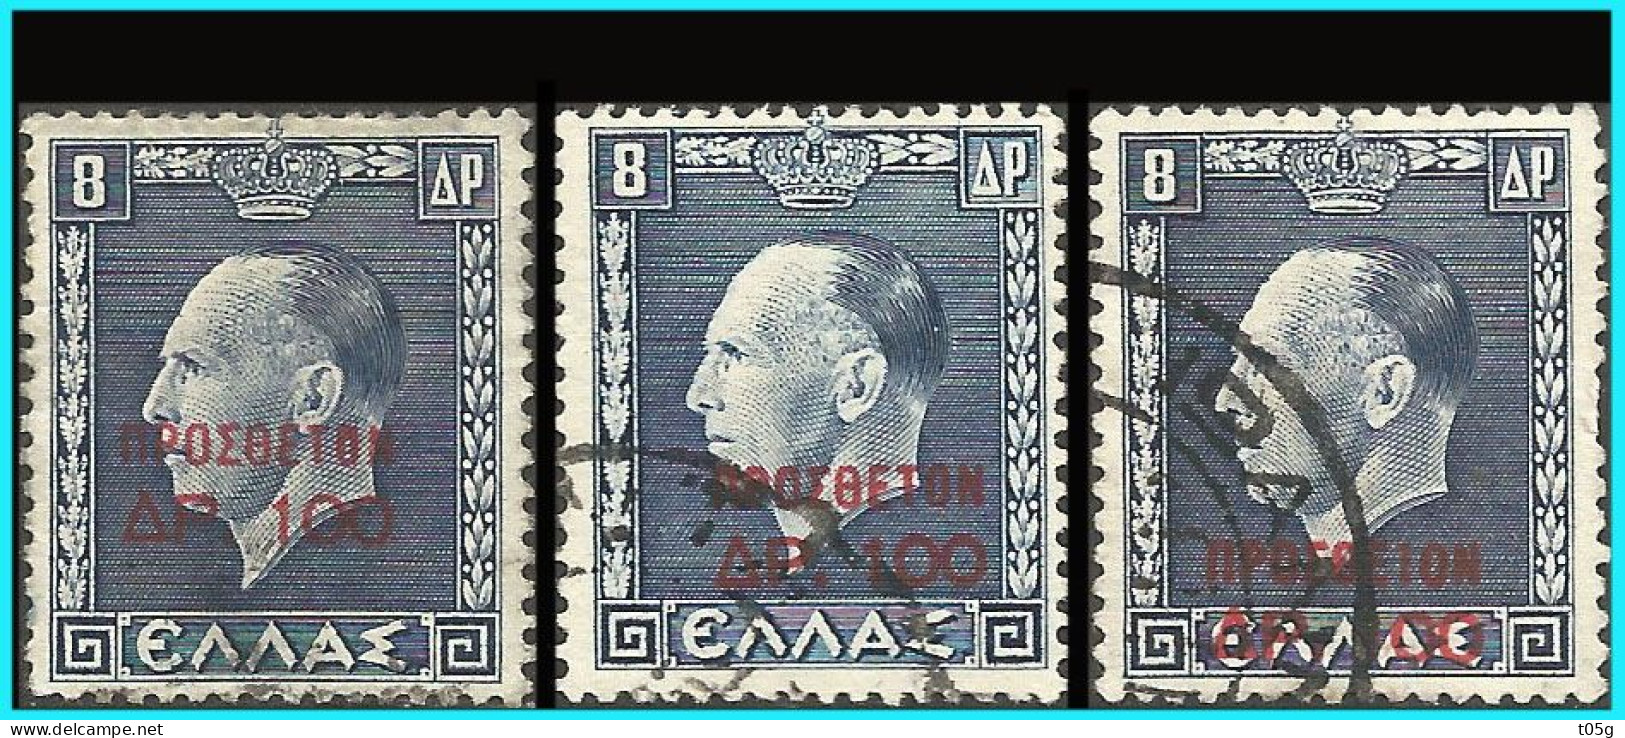 GREECE-GRECE-1951: overprints Reading From Up To Down- Charity Stamps Used - Beneficiencia (Sellos De)